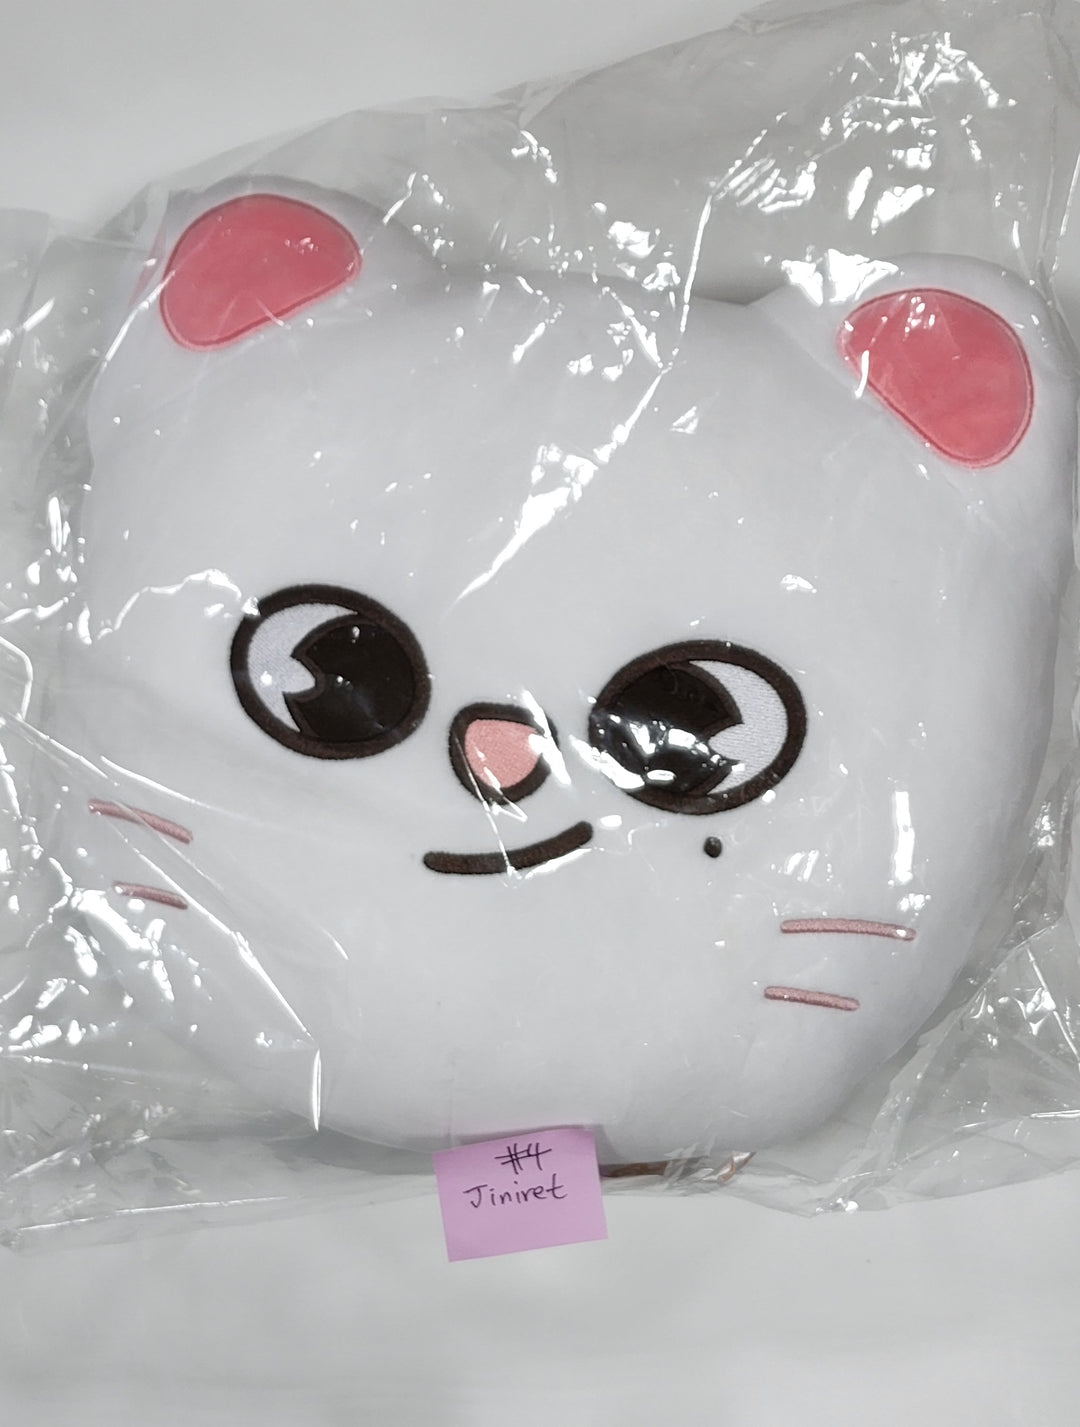 Stray Kids X SKZOO Pop-Up Store 'THE VICTORY' - SKZOO MD [SKZOO PLUSH CUSHION]